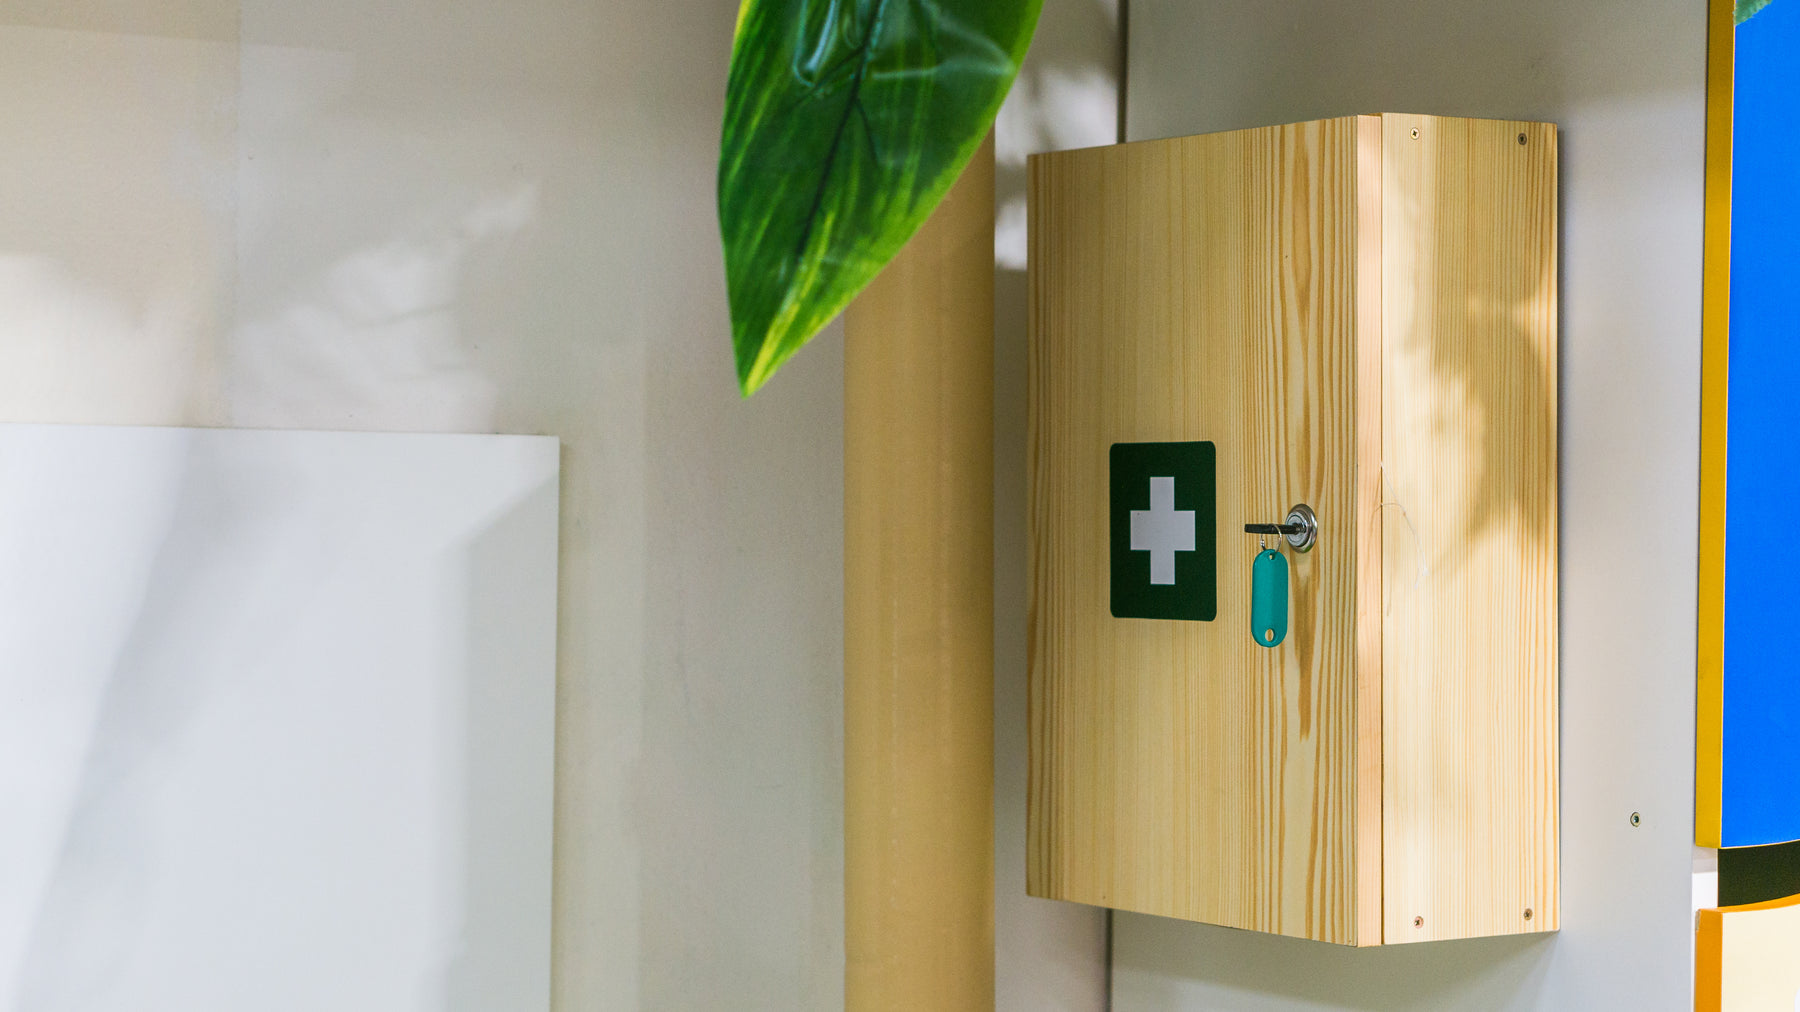 Can we help you find the best cabinet for your defibrillator?